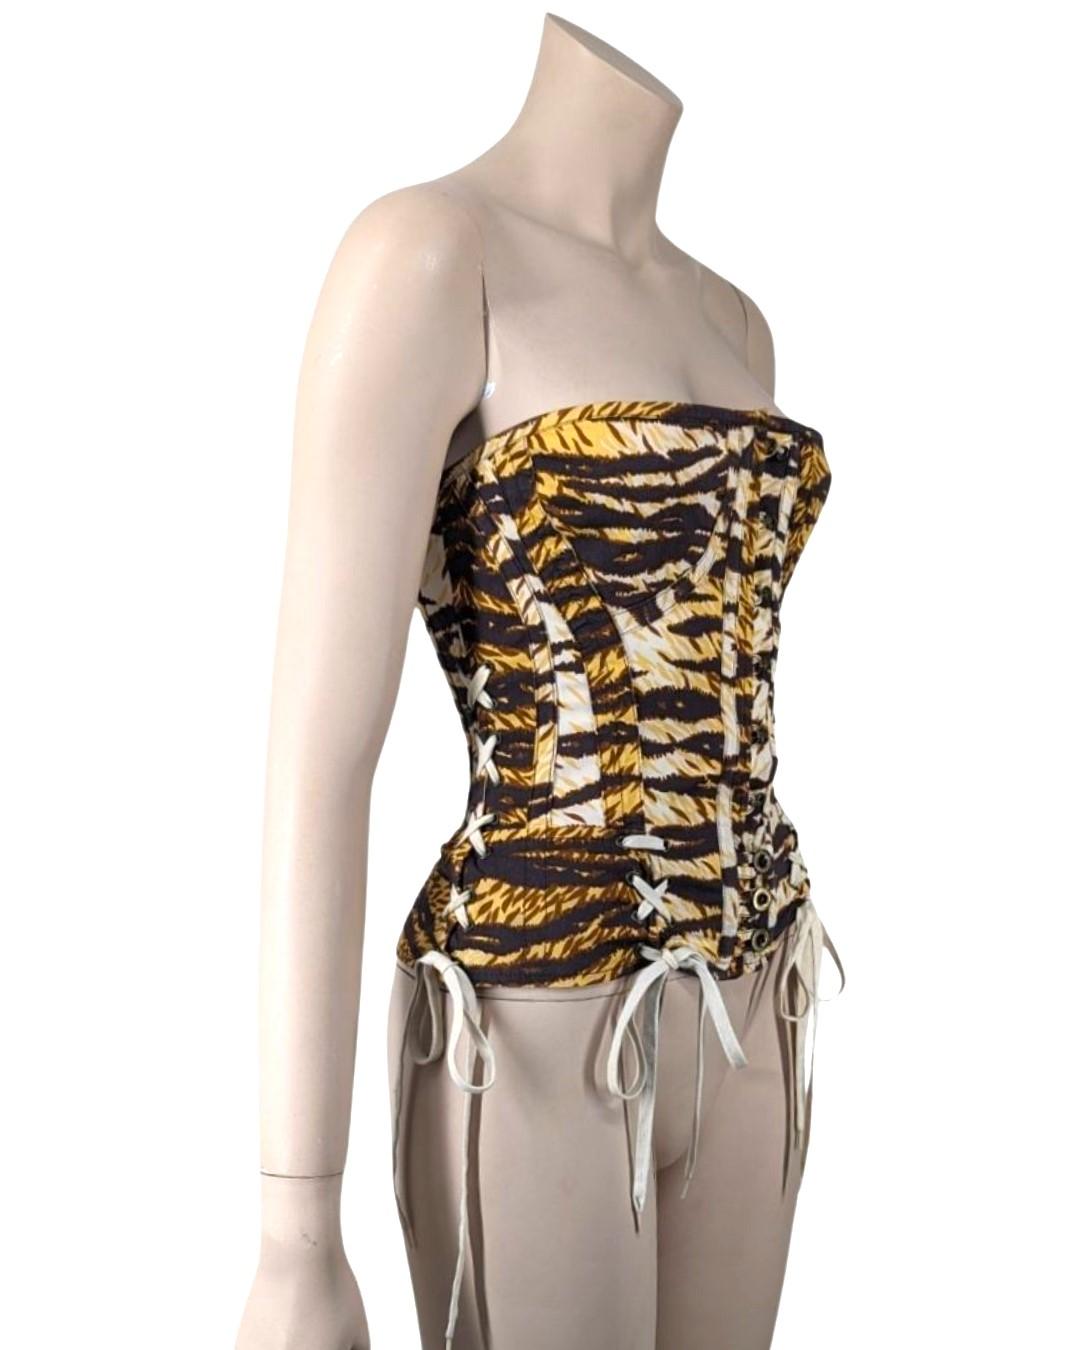 D&G top corset with lacing on each sides. Circa 2000s. Rare.

· Front opening with metal busk
· Tiger print
· Boning
 

Fits S / Marked 26/40

Flat measurements : 

Breast :  38 cm
Waist :  30 cm
Length : 35 cm
 
Colors : Multicolored 

Content :